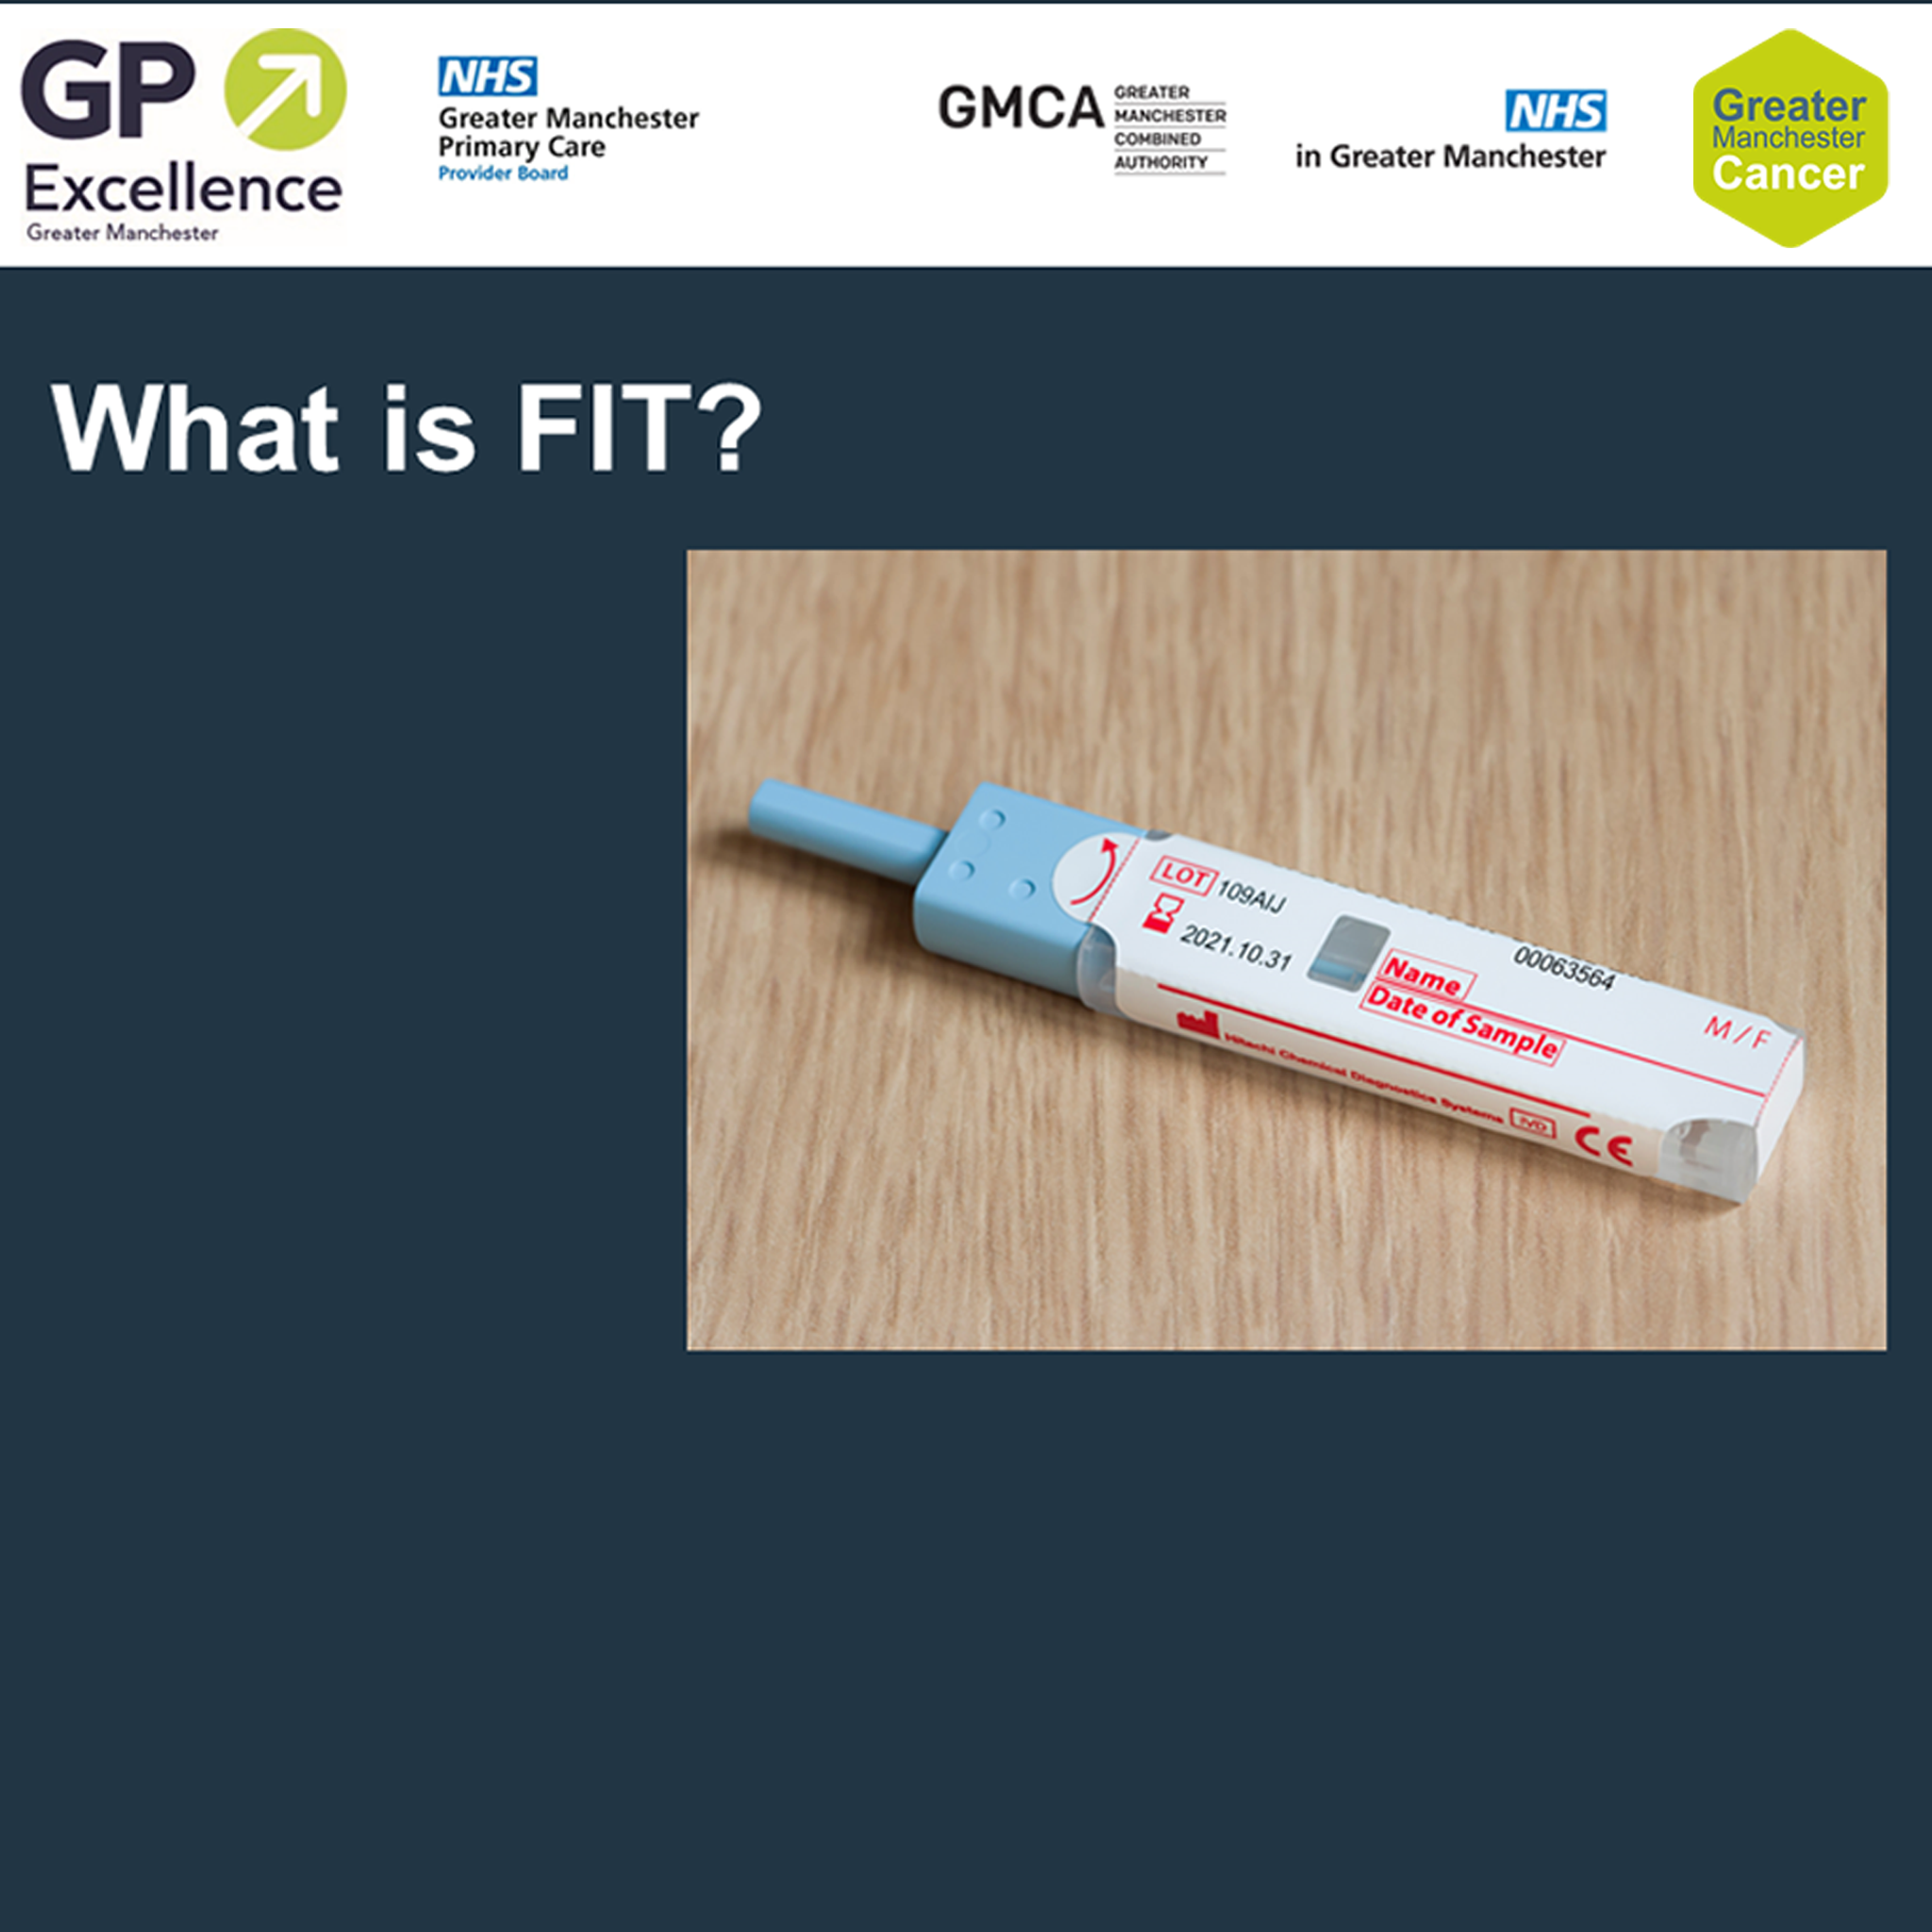 Understanding the Lower GI FIT (Faecal Immunochemical Test)